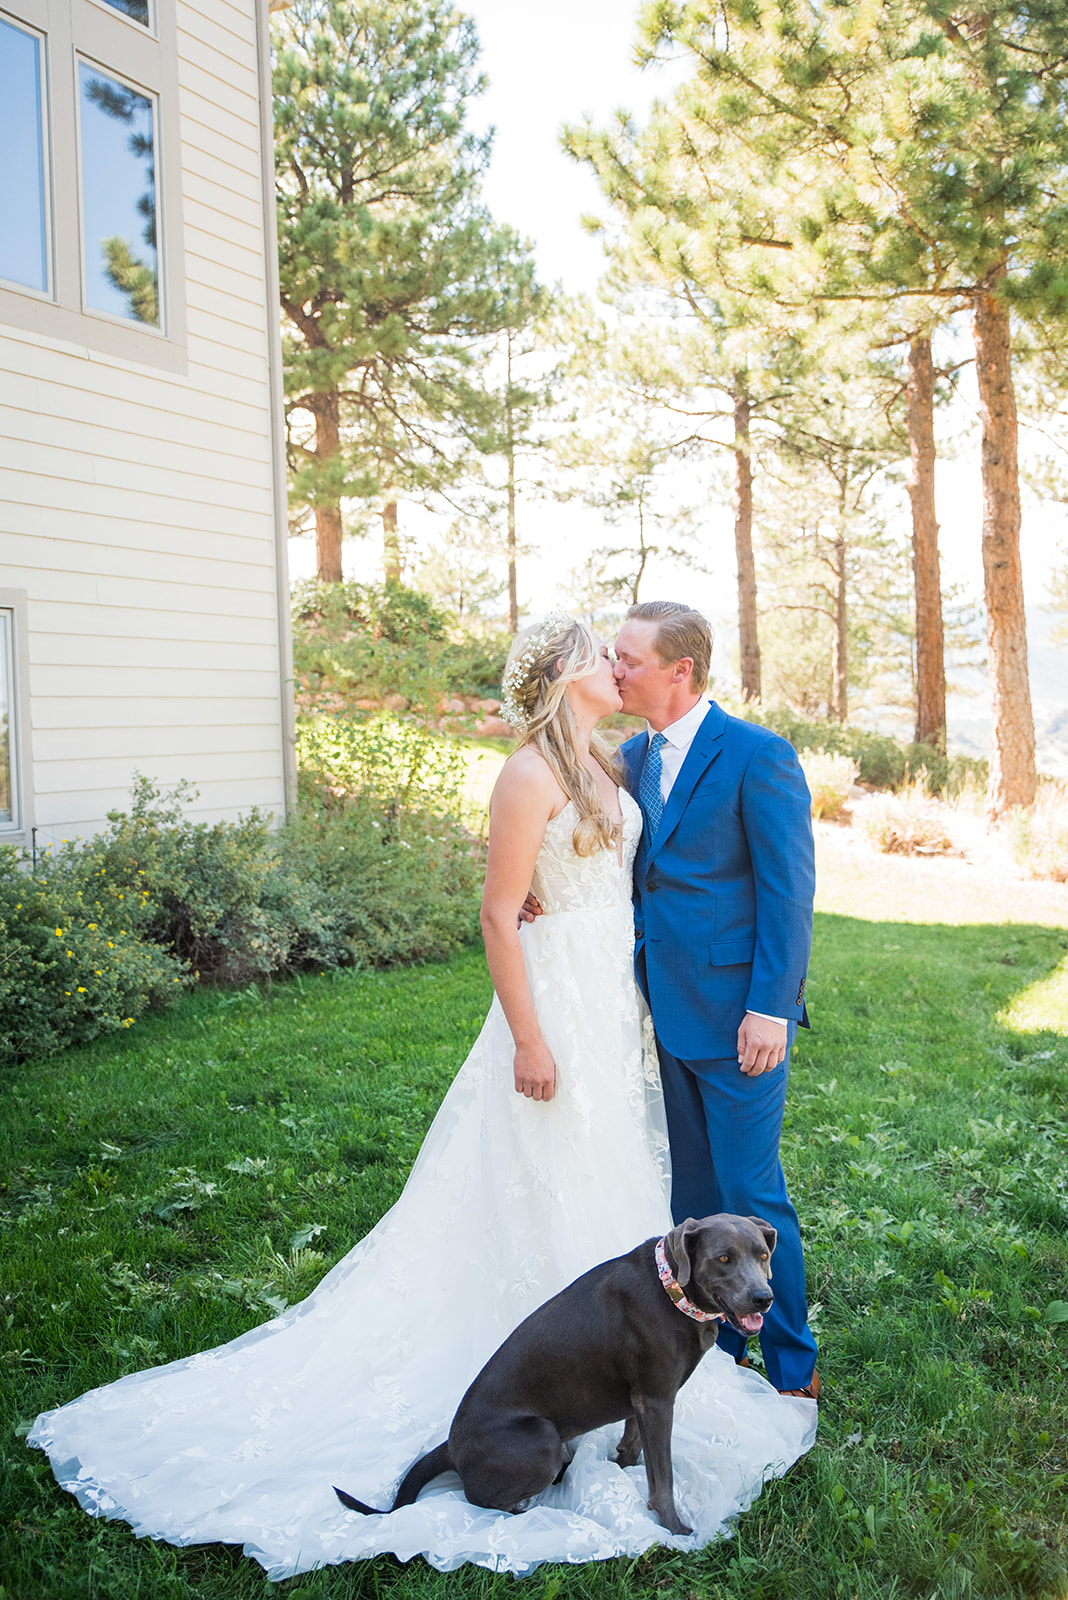 Bride and groom share a kiss with their dog in the foreground.